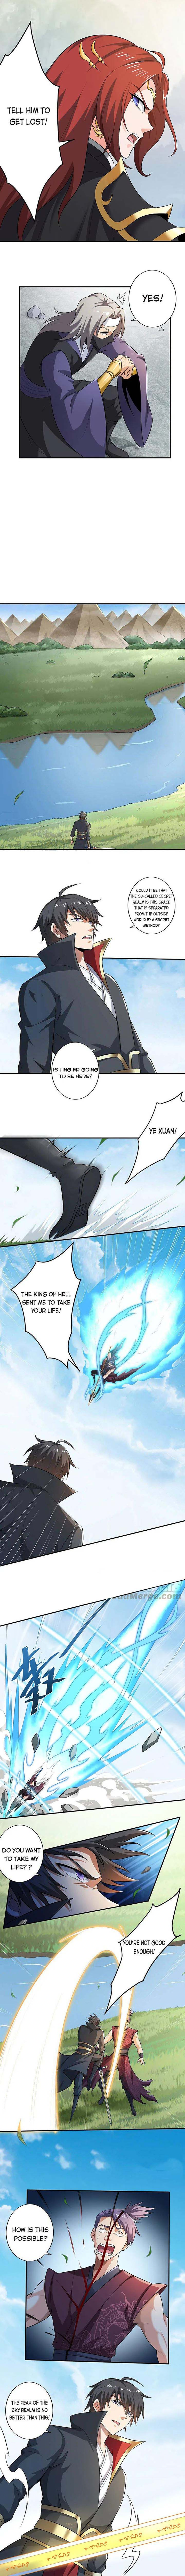 One Sword Reigns Supreme Chapter 125 Page 4